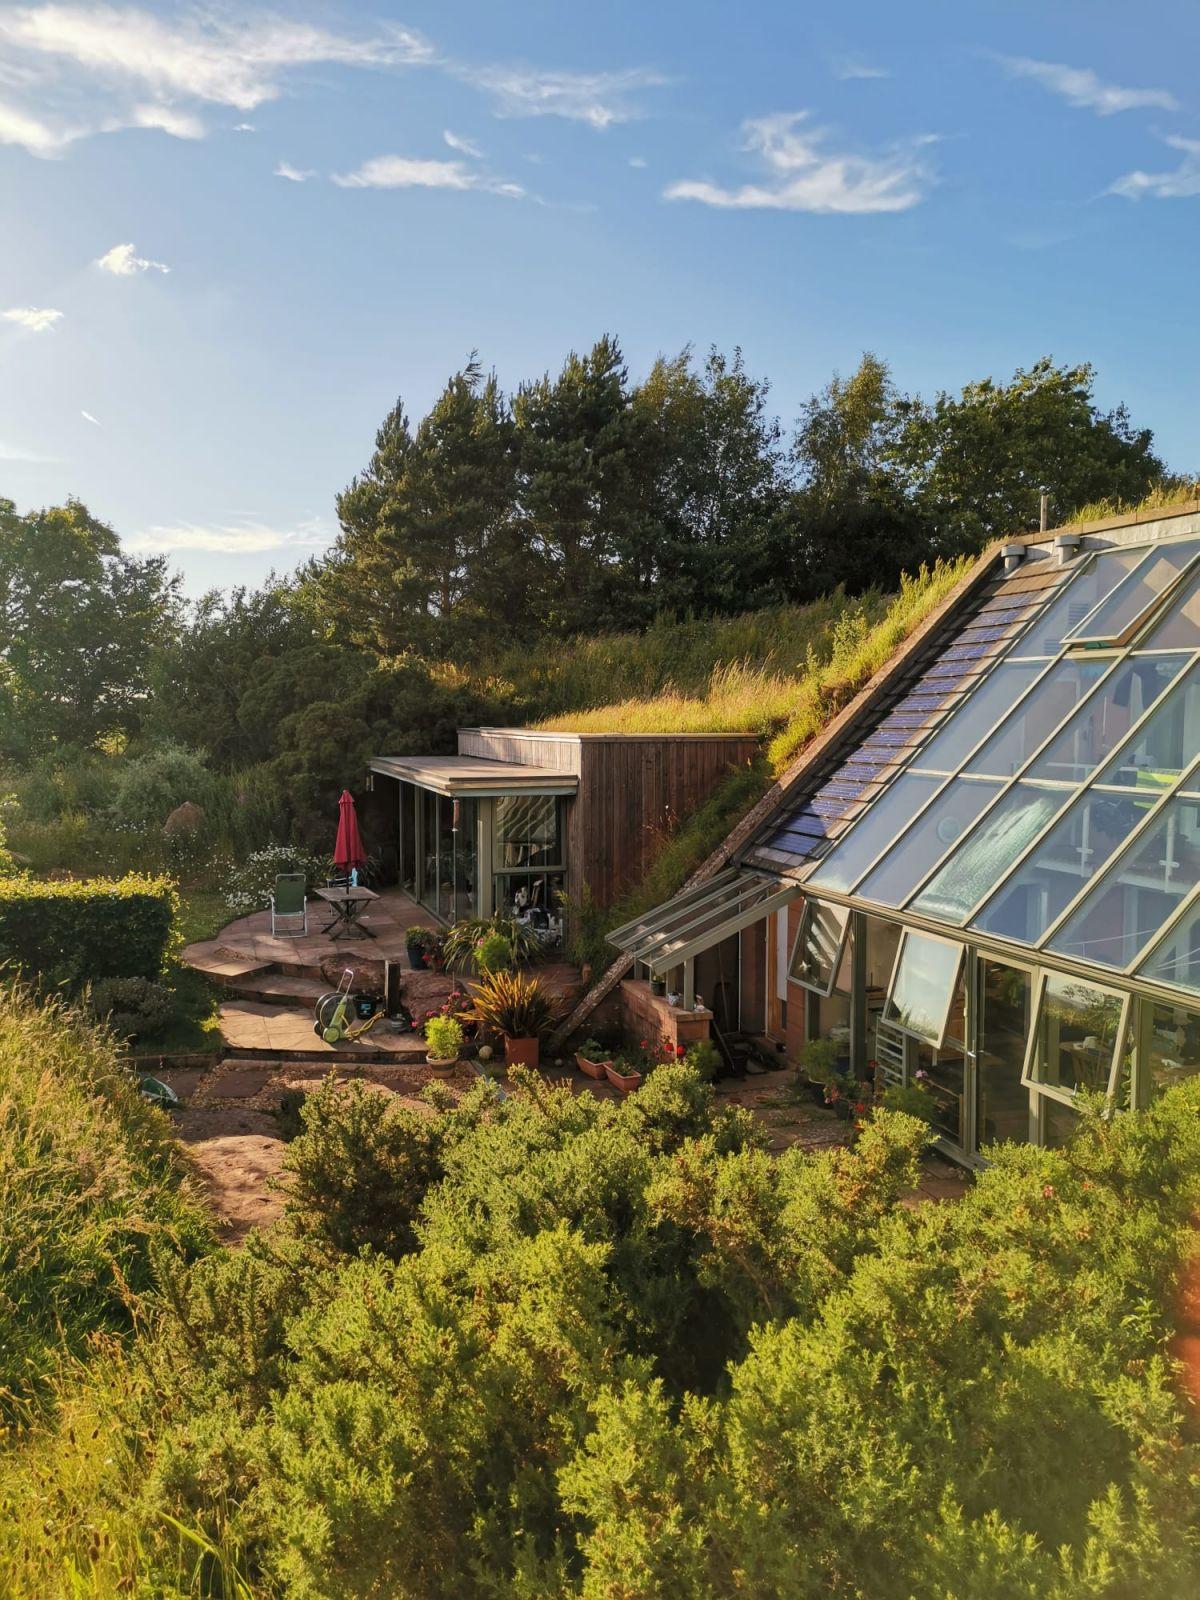 Helen's eco house, featured on Grand Designs